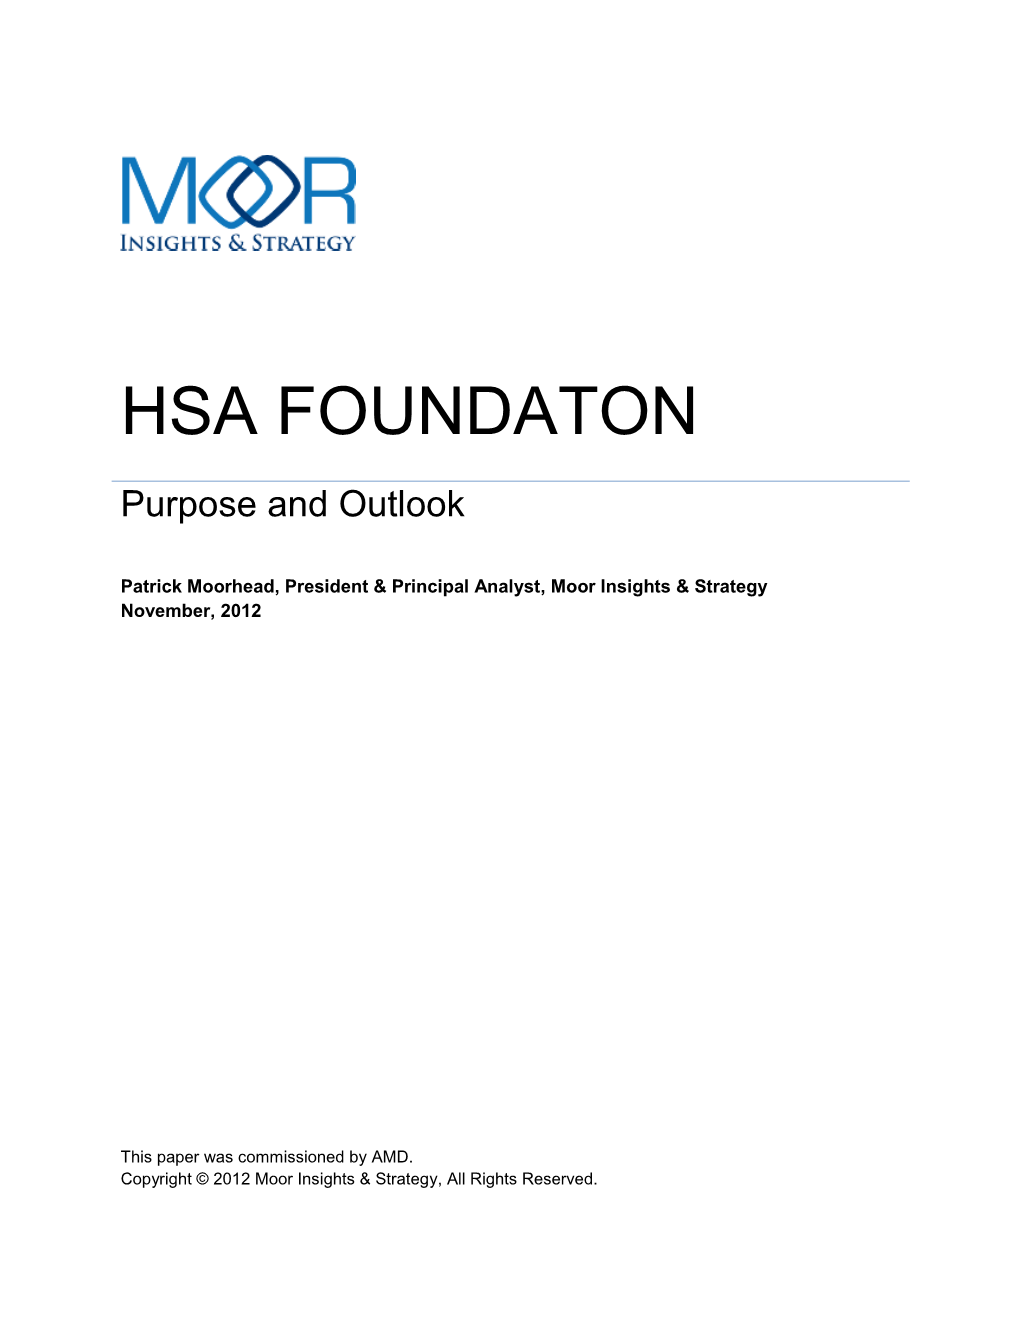 Moor Insights & Strategy Looks at the HSAF Goals, Benefits and Risks, and the Paper